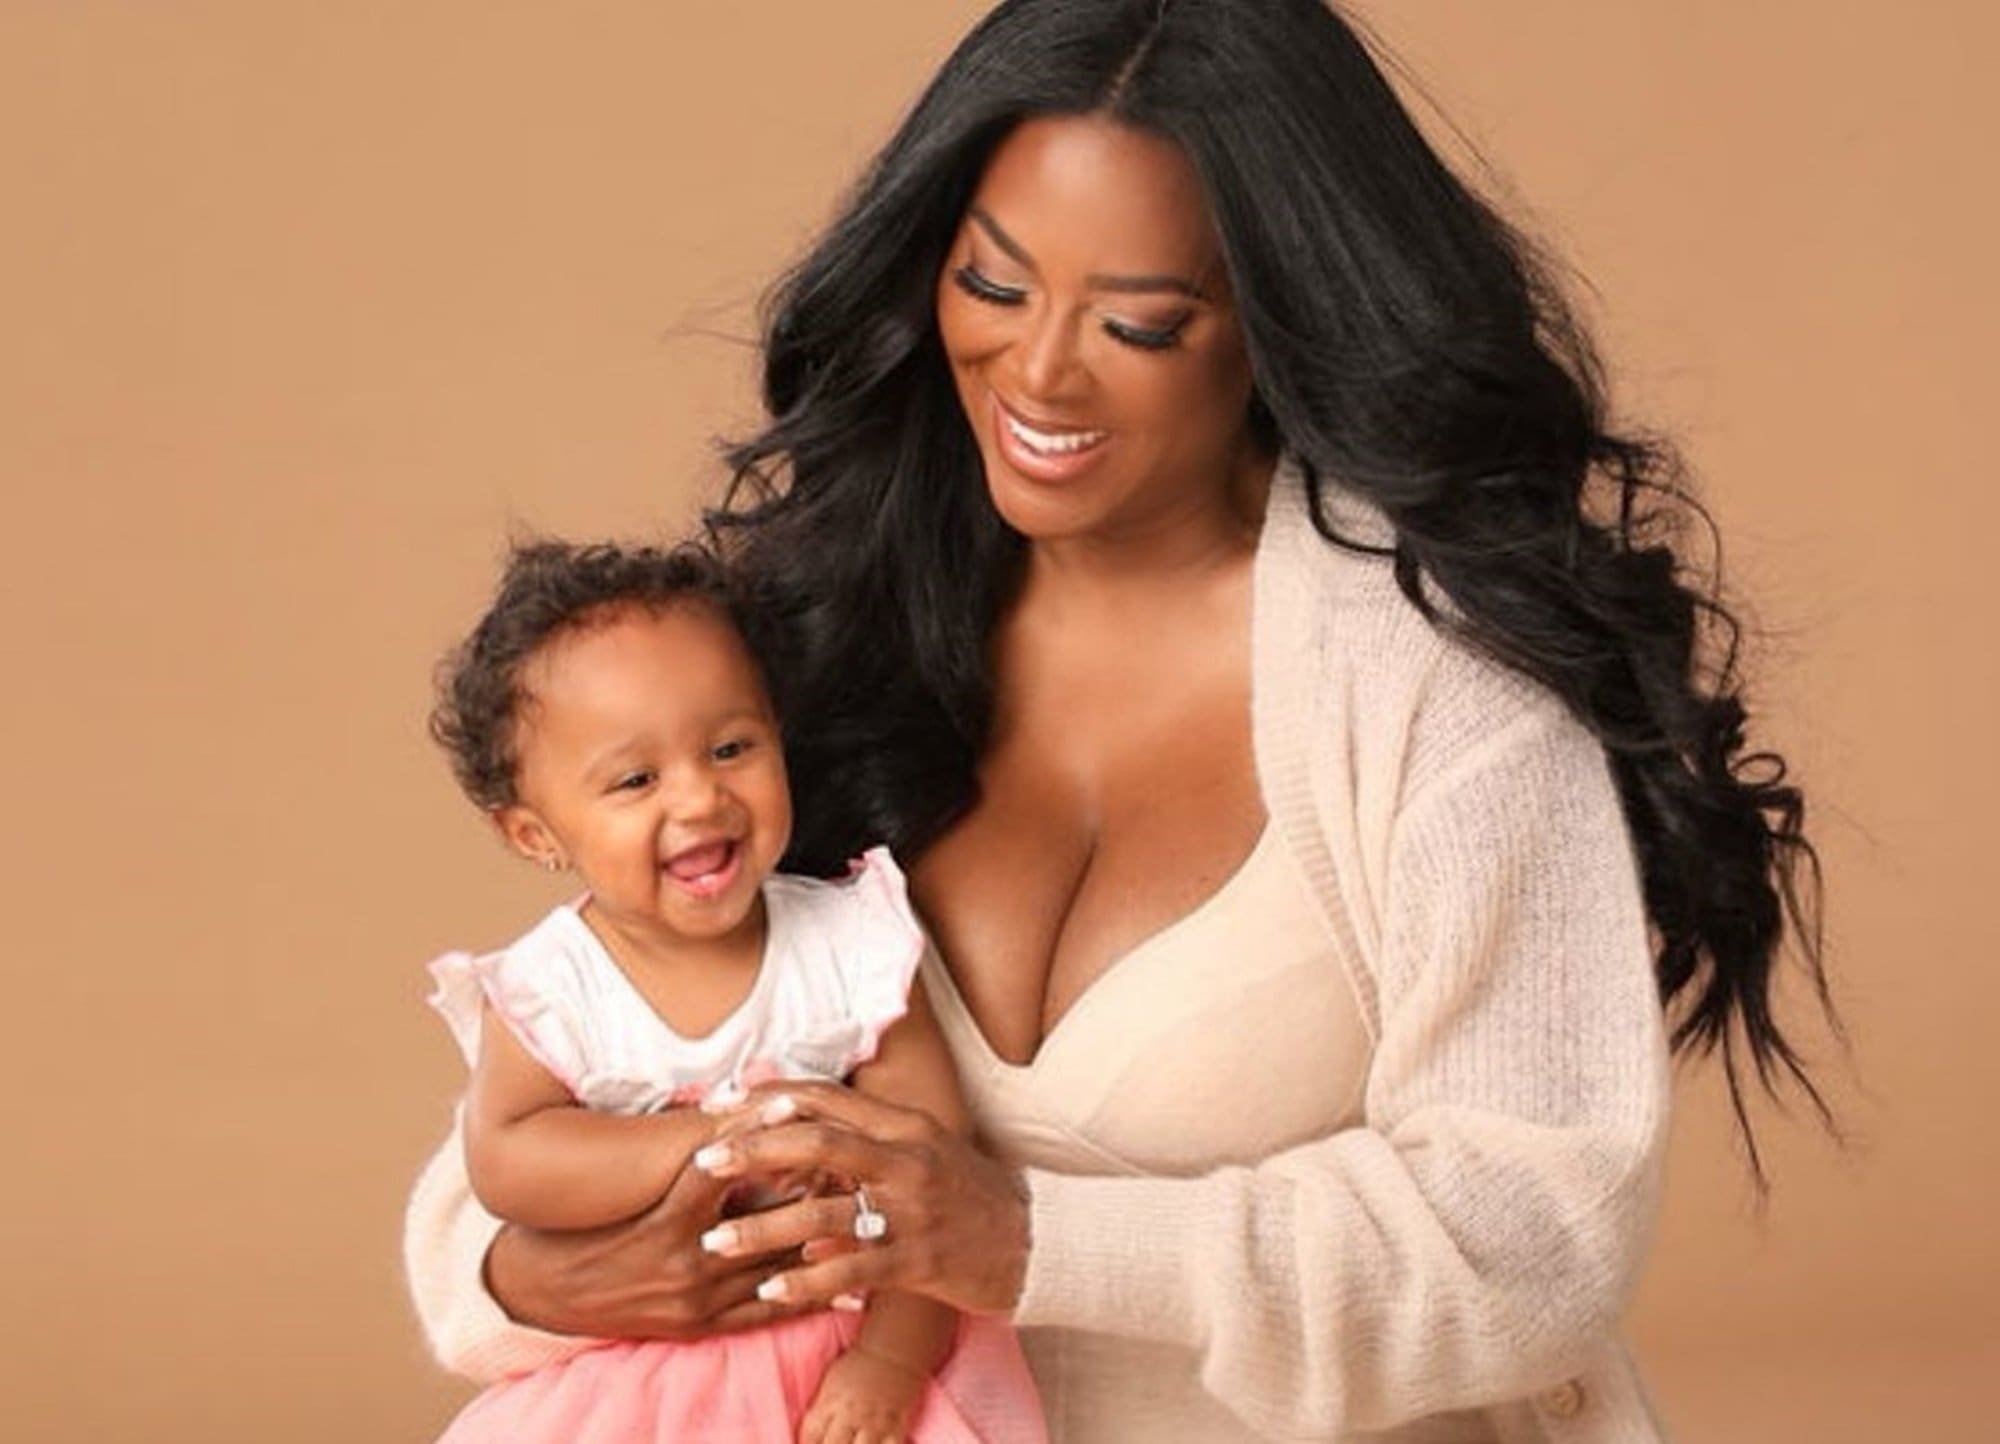 Kenya Moore's Daughter, Brooklyn Daly Has Been Walking For A Whole Week - See The Video